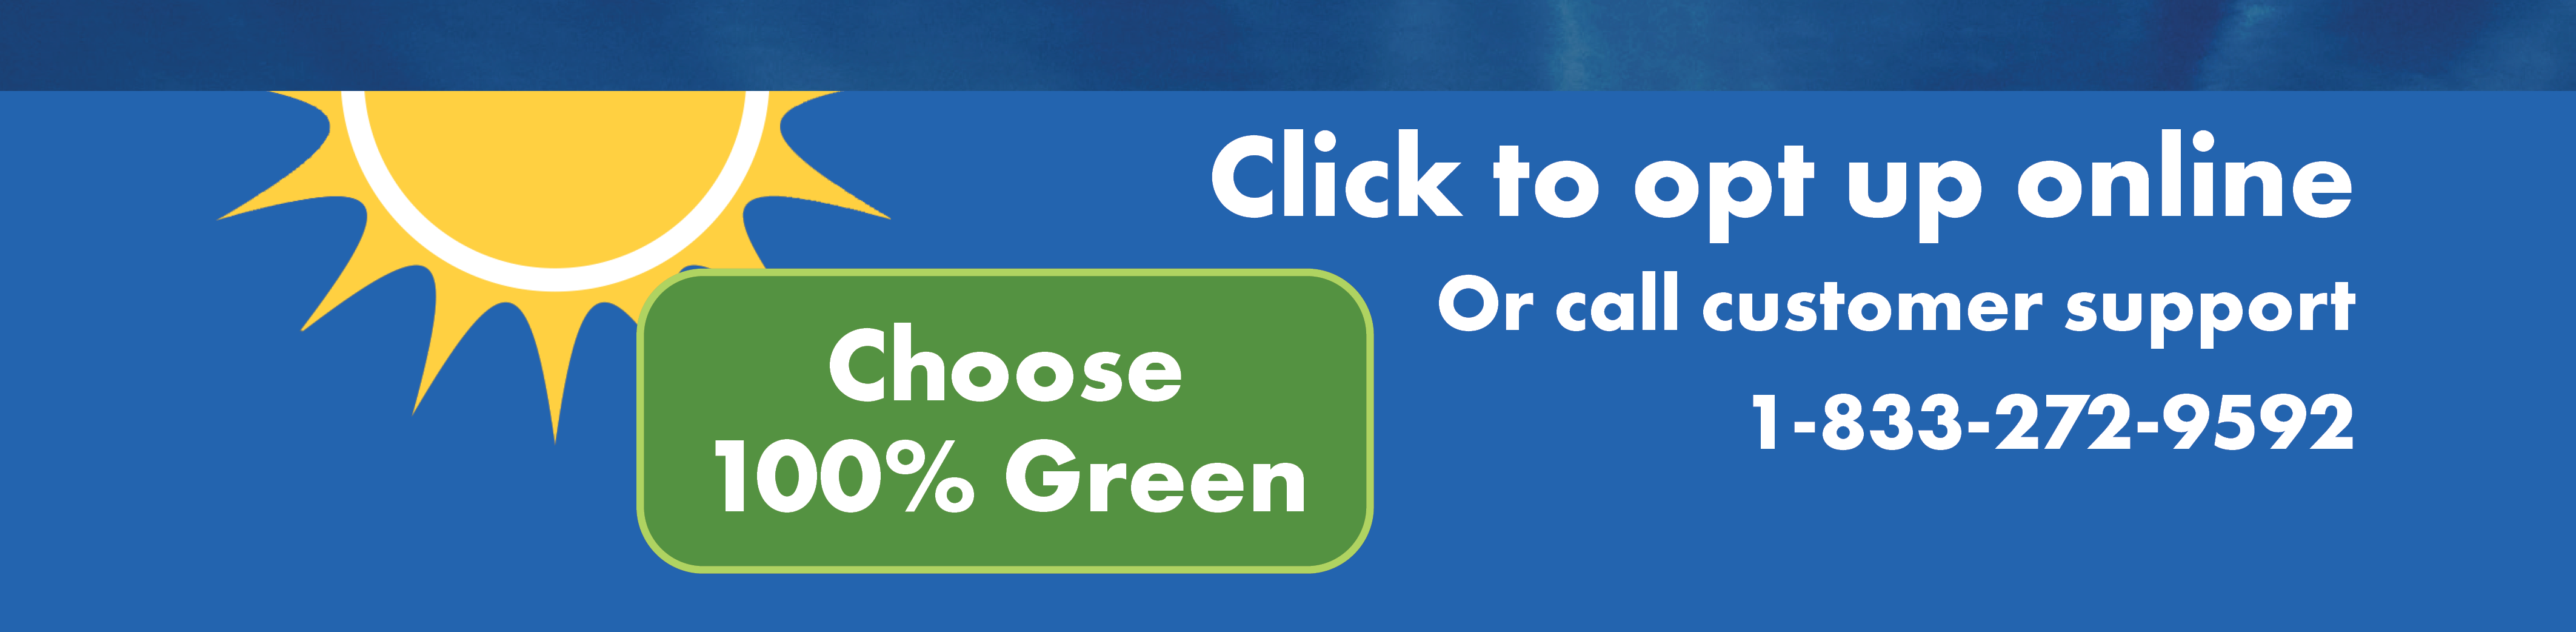 Choose 100% Green. Click to opt up online or call customer support 1-833-272-9592